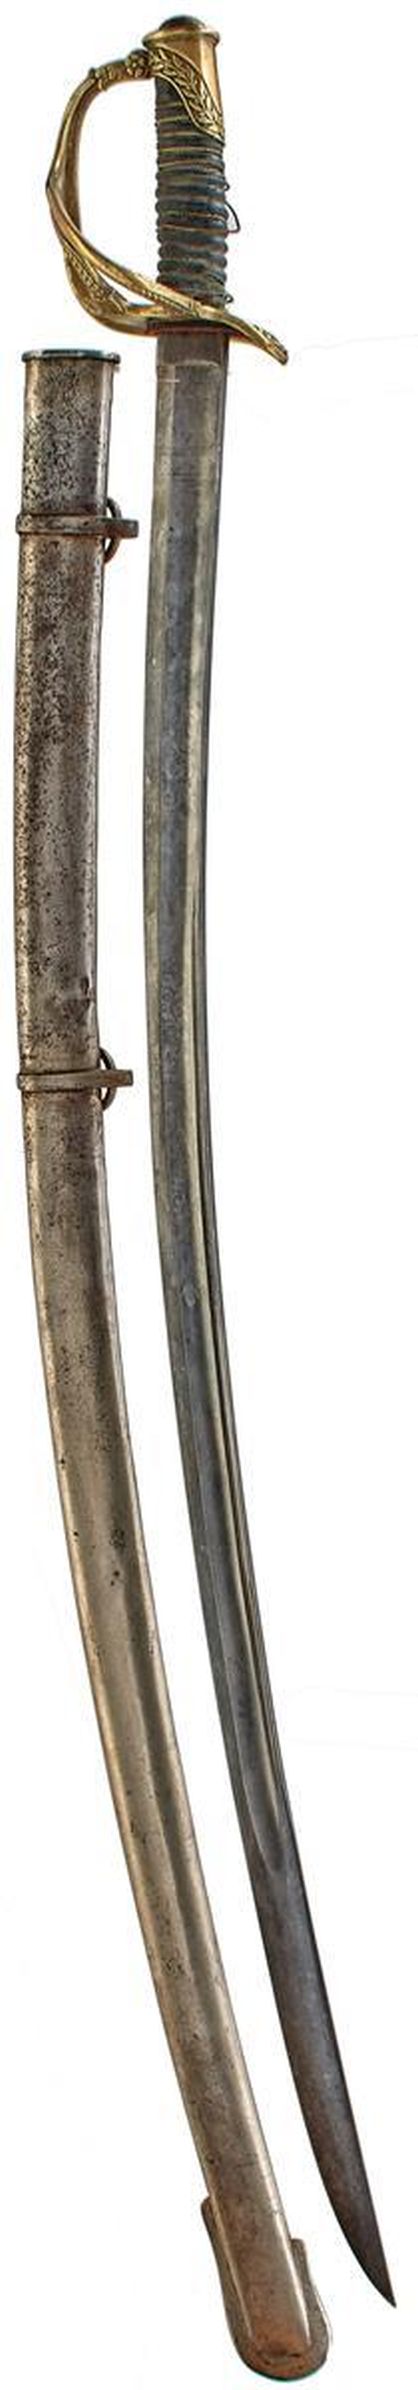 AN AMERICAN MODEL 1860 CAVALRY OFFICER'S SWORD, 88.5cm curved fullered blade etched with scrolling